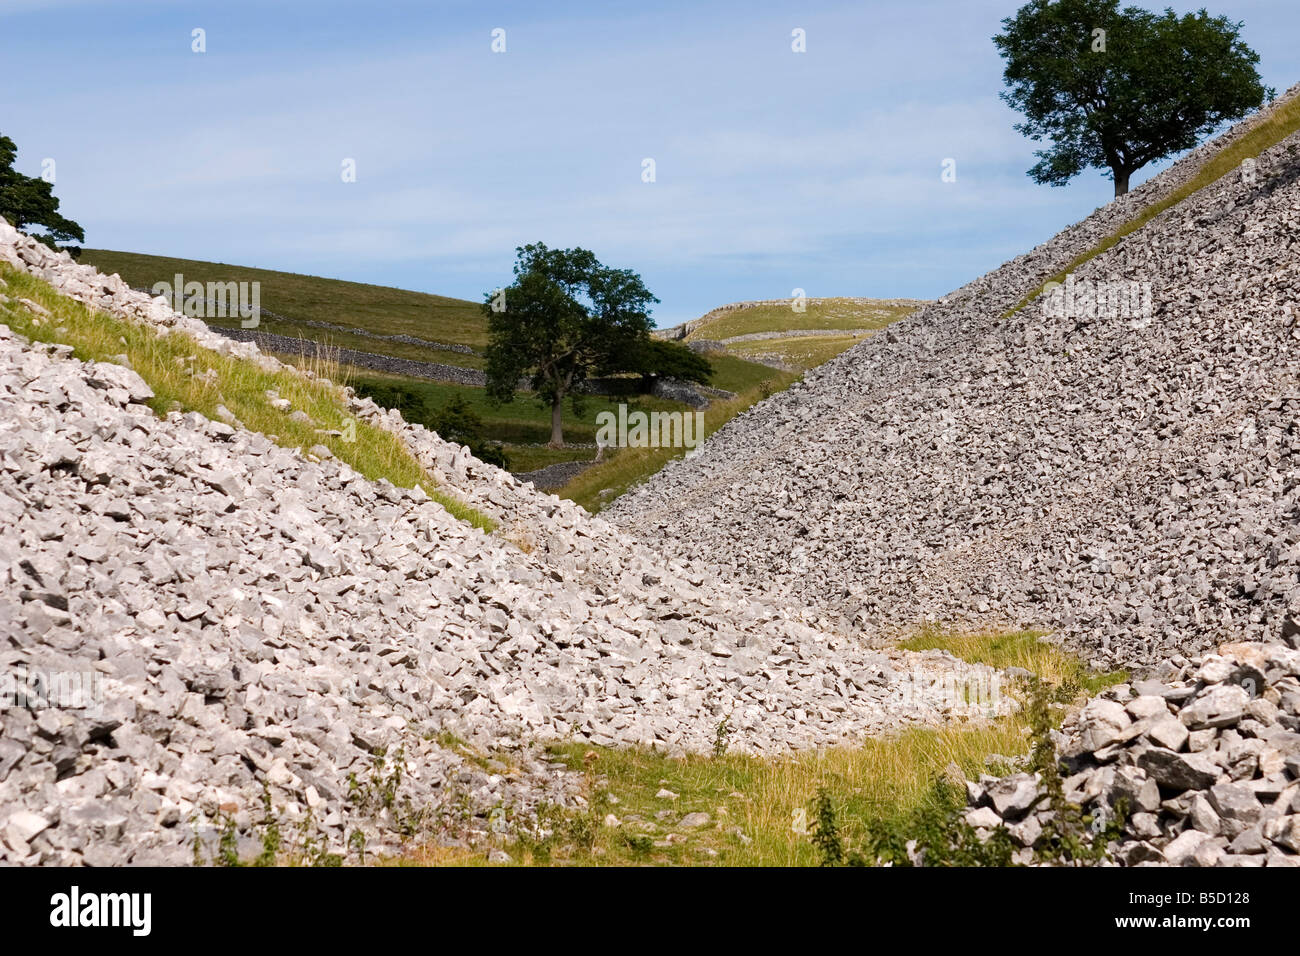 Periglacial dry valley and scree slope, near Conistone, Yorkshire Dales National Park, North Yorkshire, England, Europe Stock Photo